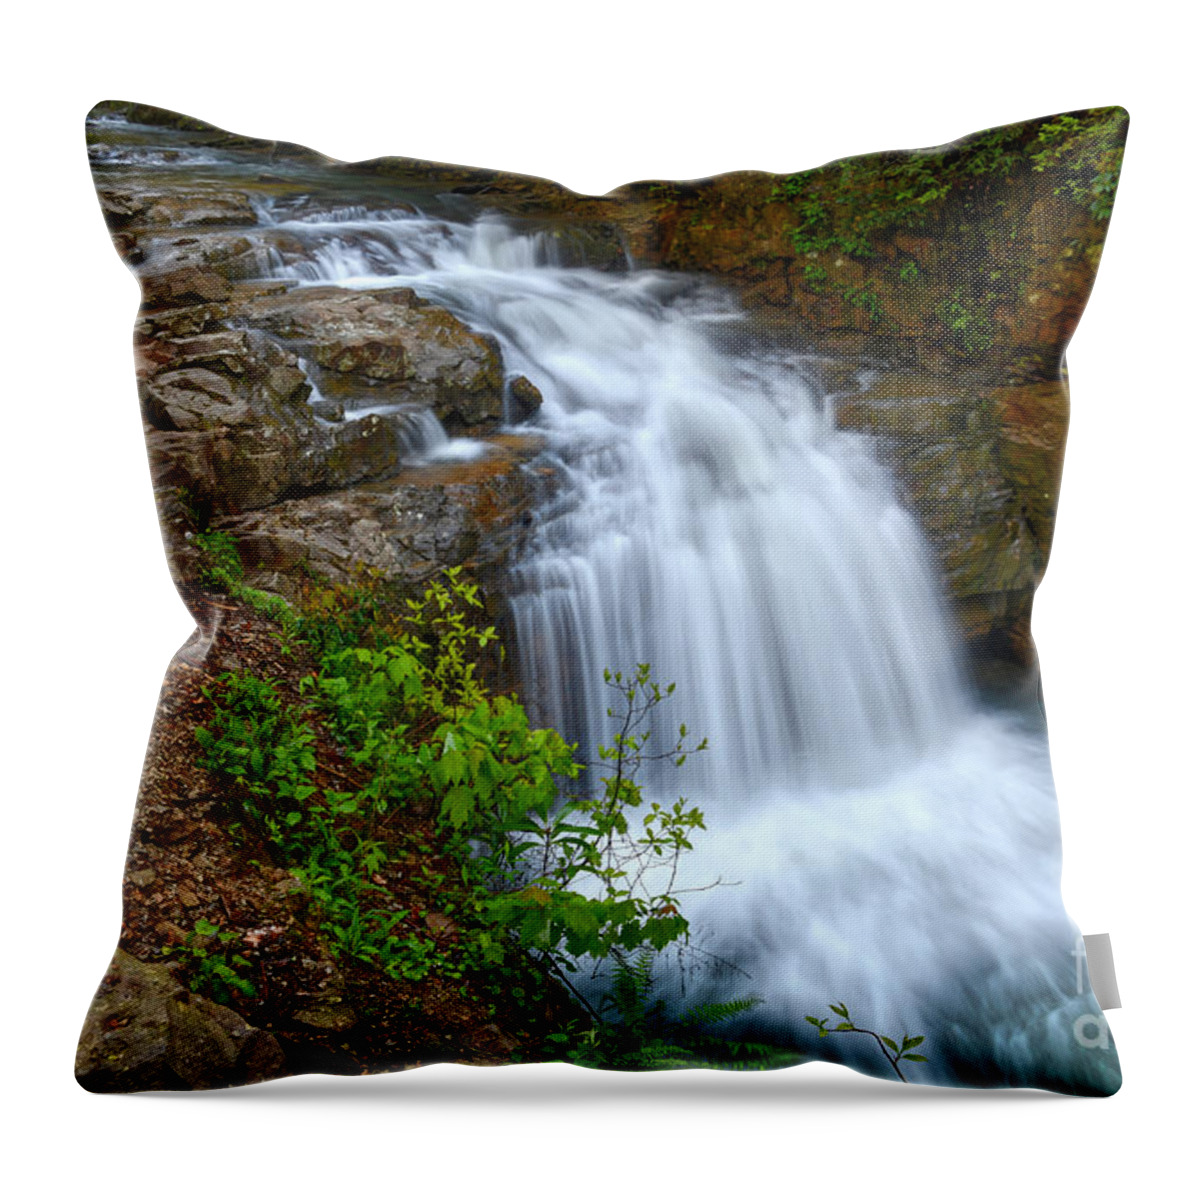 Triple Falls Throw Pillow featuring the photograph Triple Falls On Bruce Creek 13 by Phil Perkins